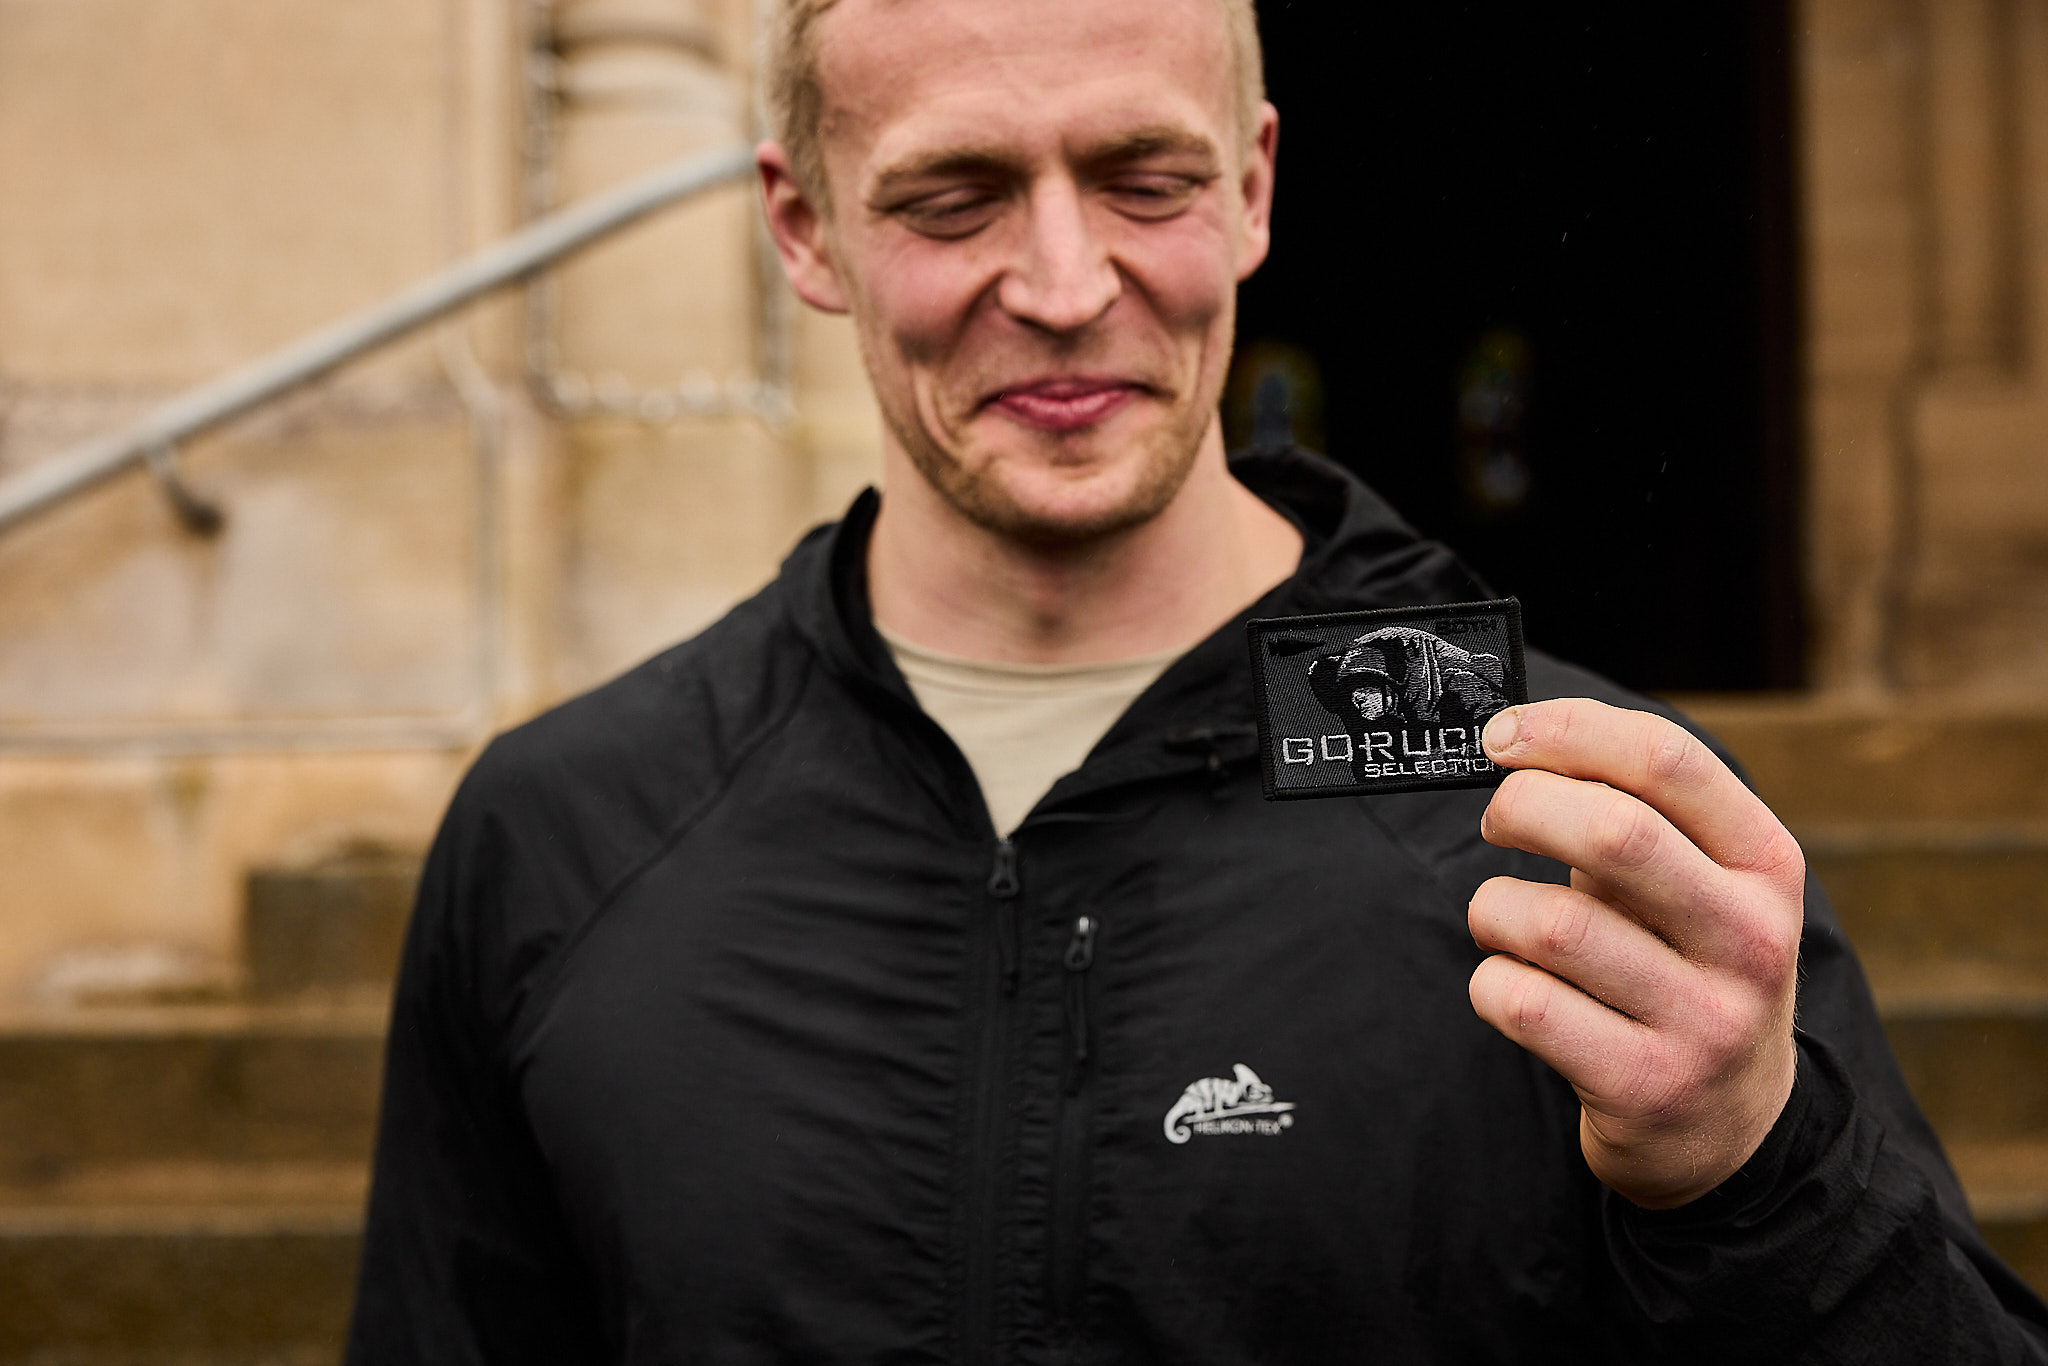 Marc Buddensiek holding the coveted GoRuck Selection patch.